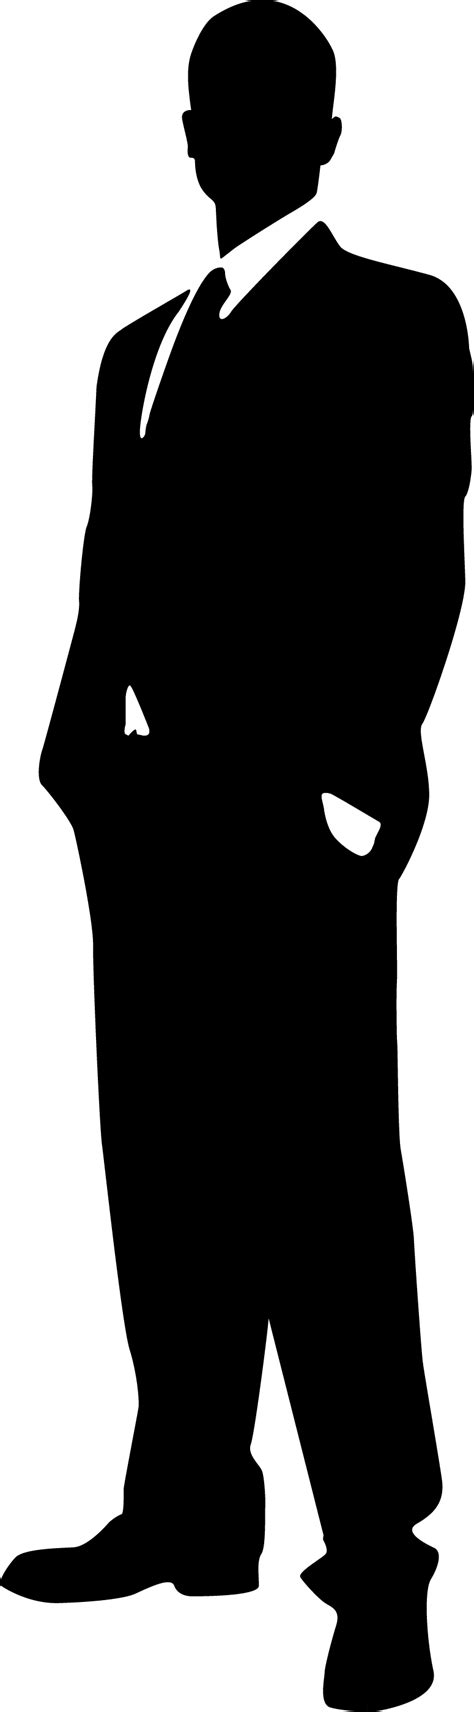 Silhouette Picture Psd Png Images Free Download Pikbest Images